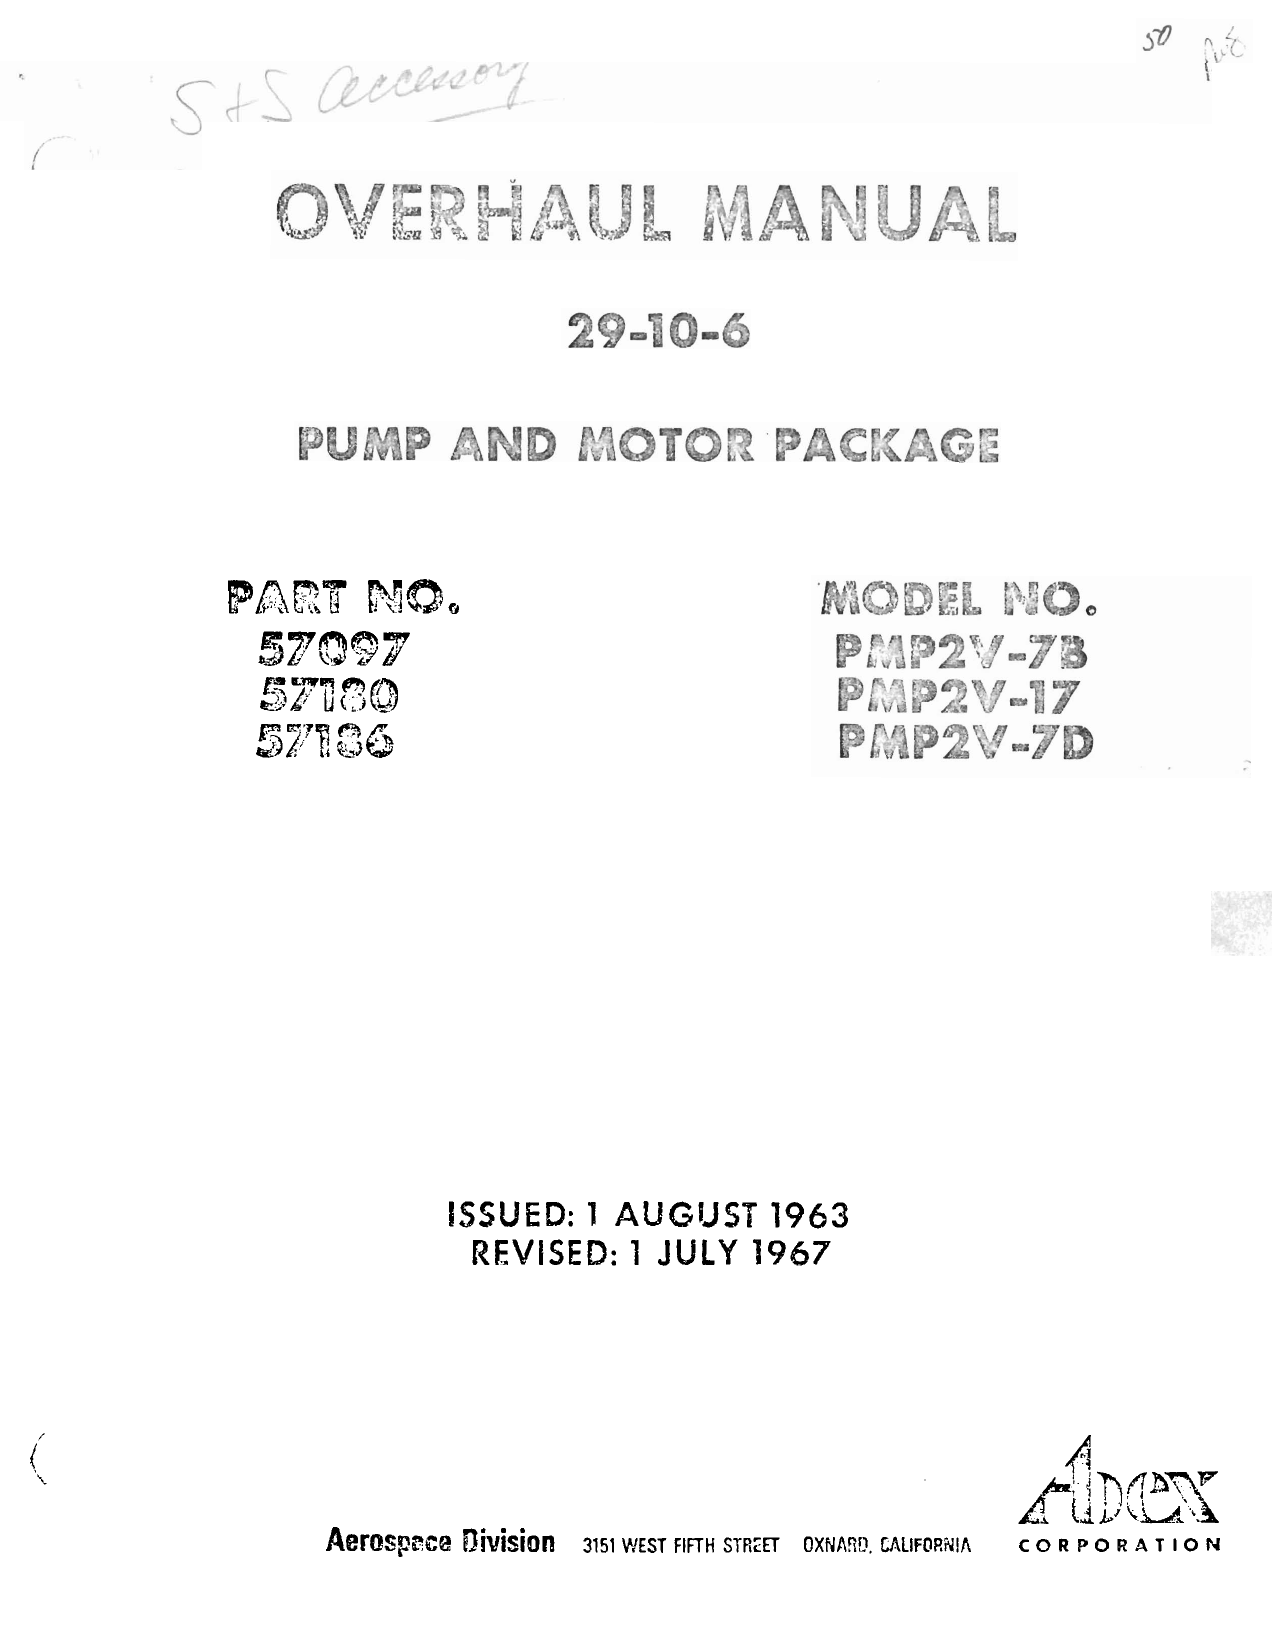 Sample page 1 from AirCorps Library document: Overhaul Manual for Pump and Motor Package - Parts 57097, 57180, and 57186